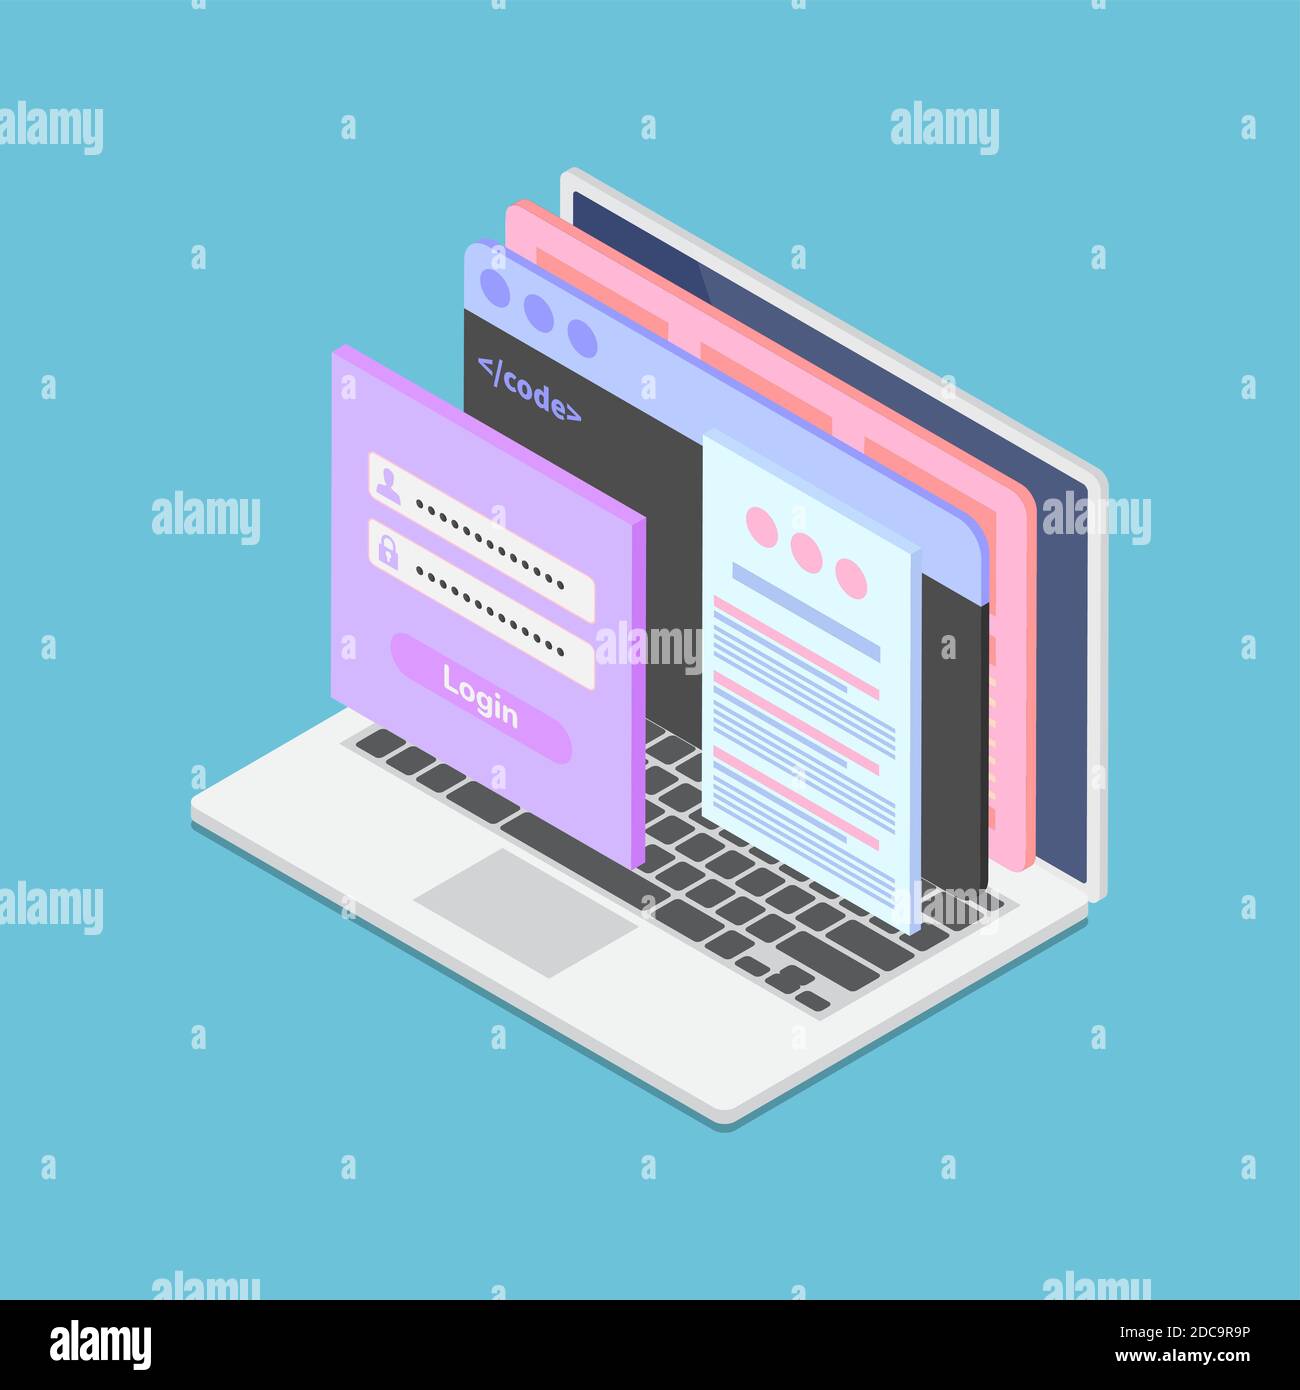 Flat 3d Isometric Web Interface with Adaptive layout Webpage on Laptop Screen. Web Customization and Development Concept. Stock Vector